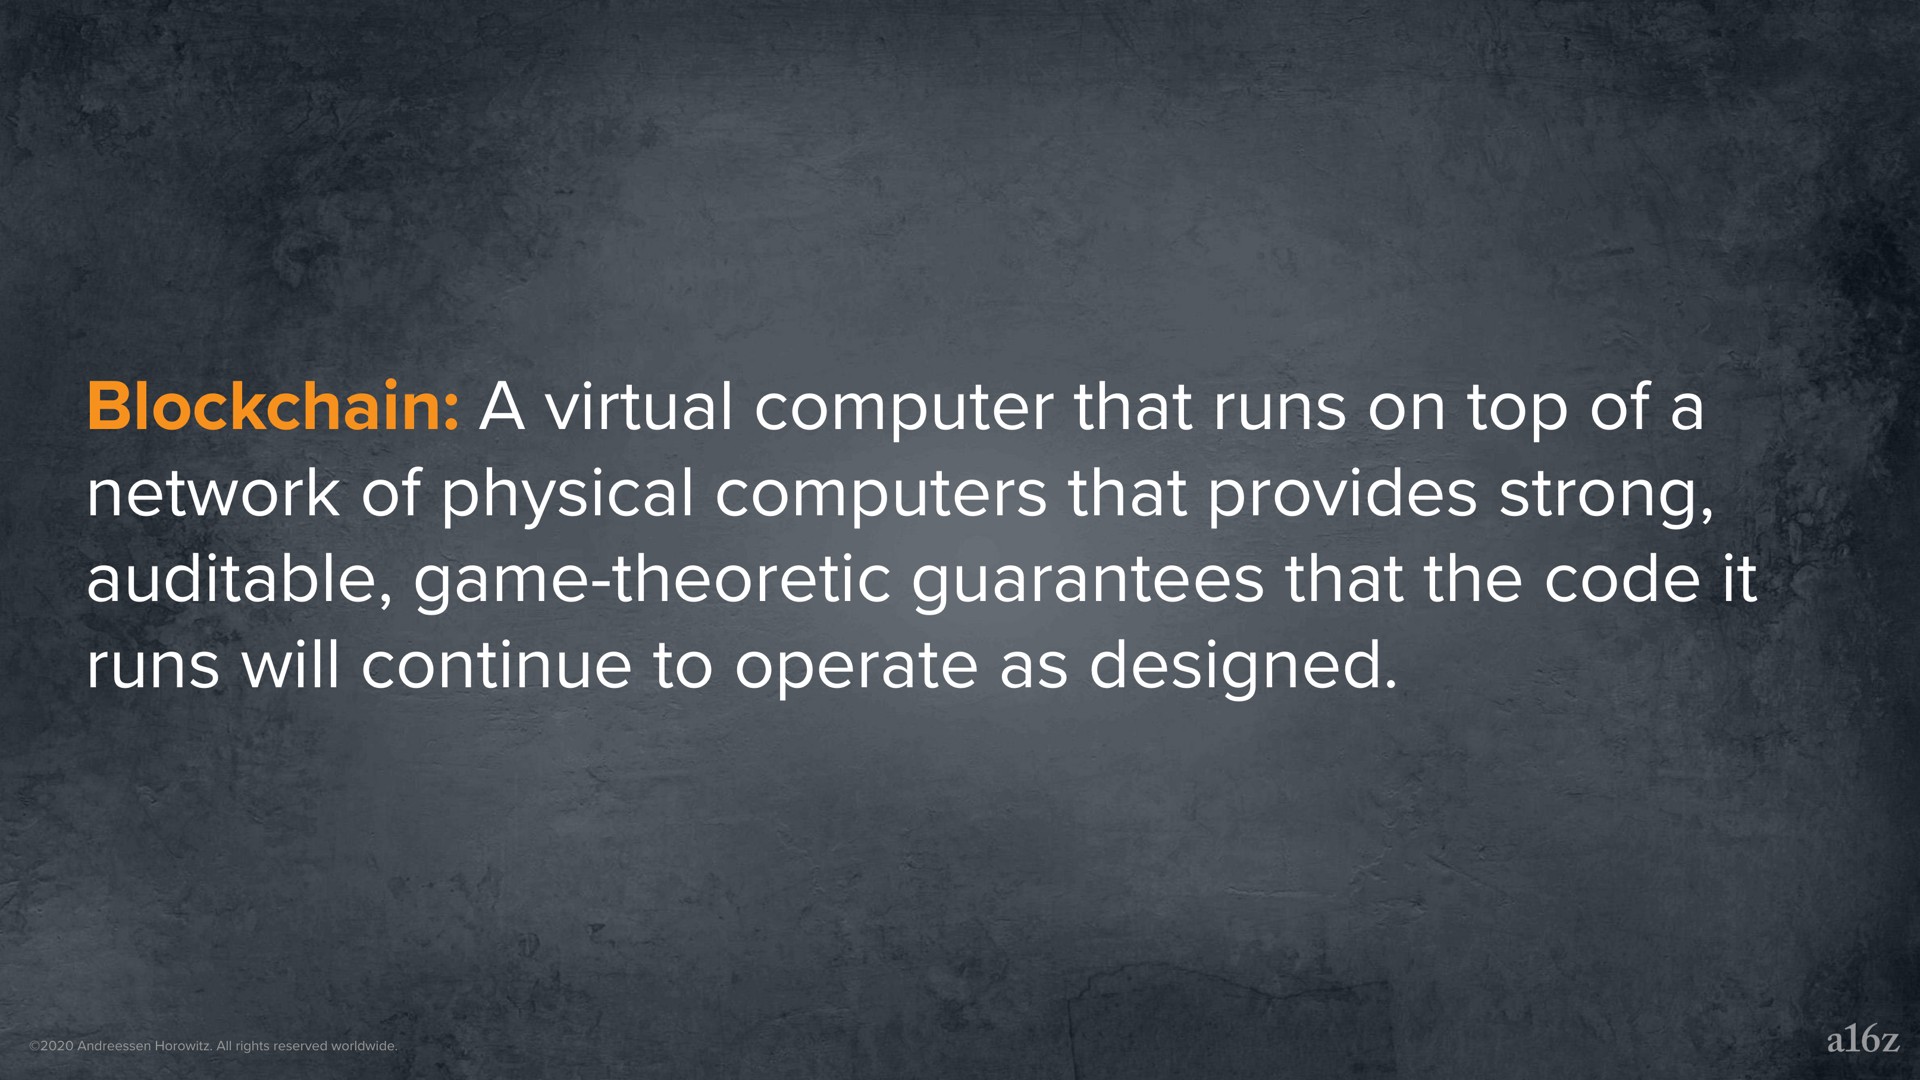 a virtual computer that runs on top of a network of physical computers that provides strong game theoretic guarantees that the code it runs will continue to operate as designed | a16z